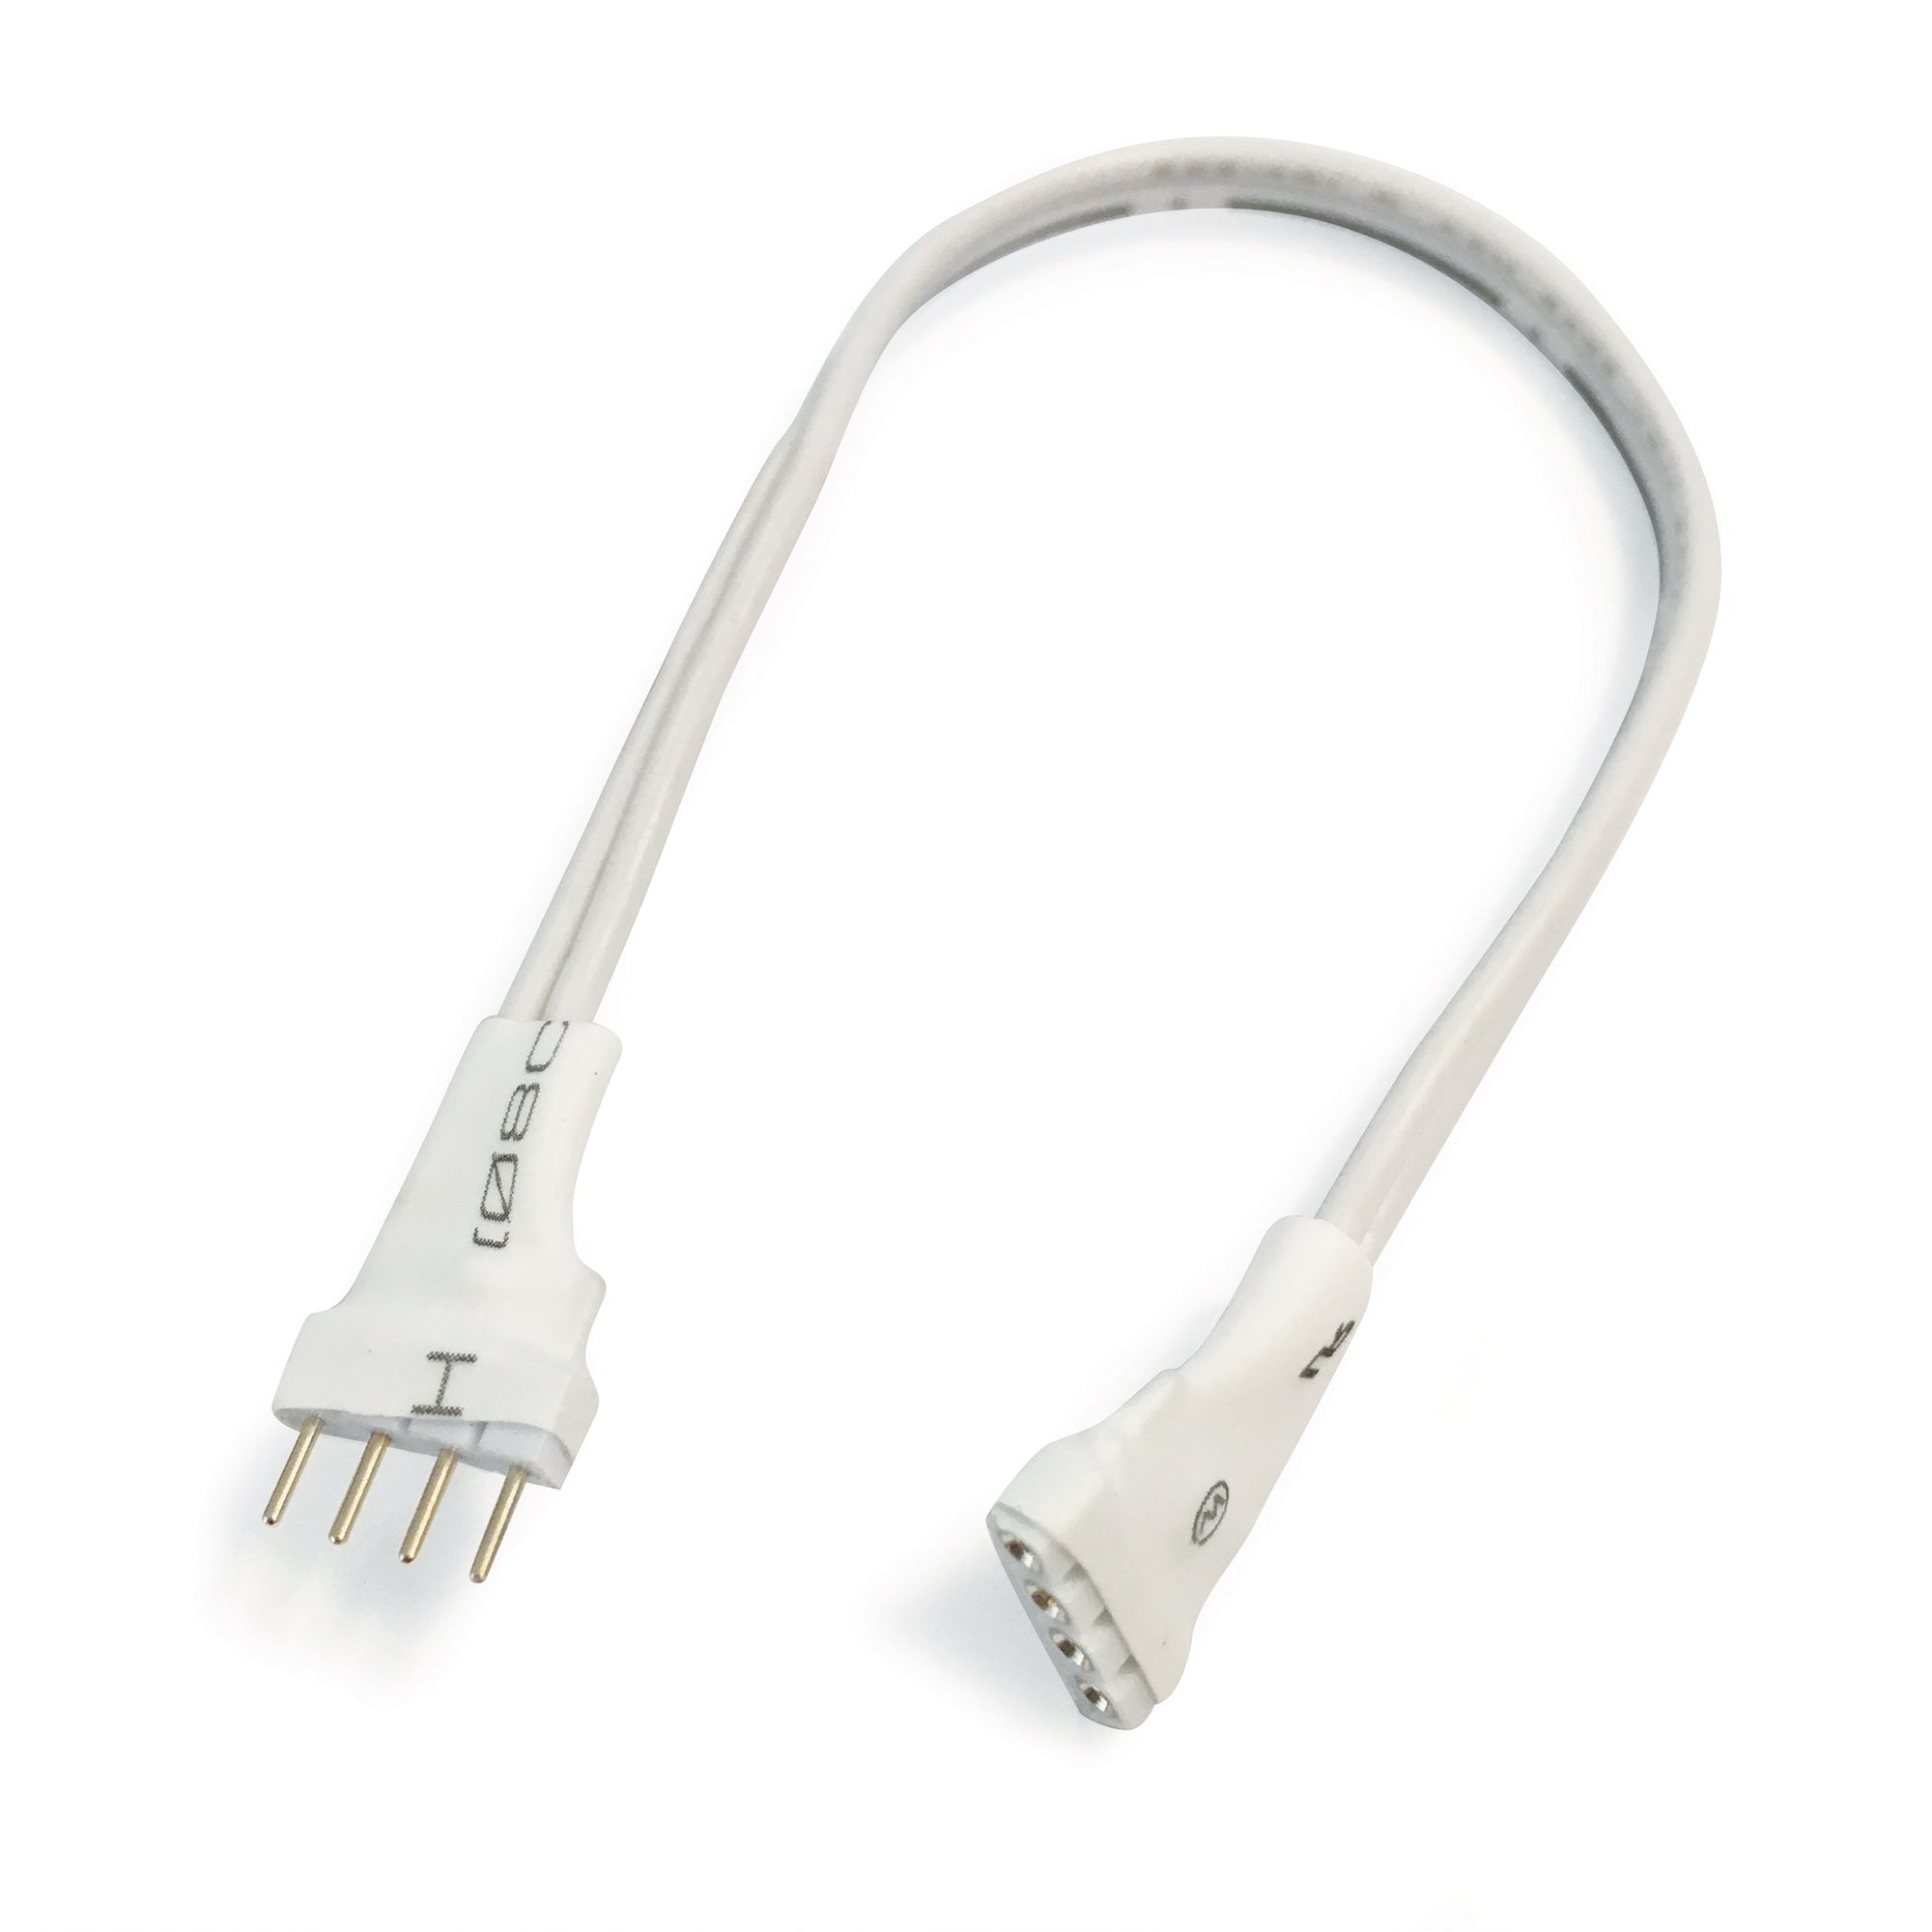 Nora Lighting NATL-272W - Accent / Undercabinet - 72 Inch Interconnection Cable for Standard & Side-Lit Tape Light, White